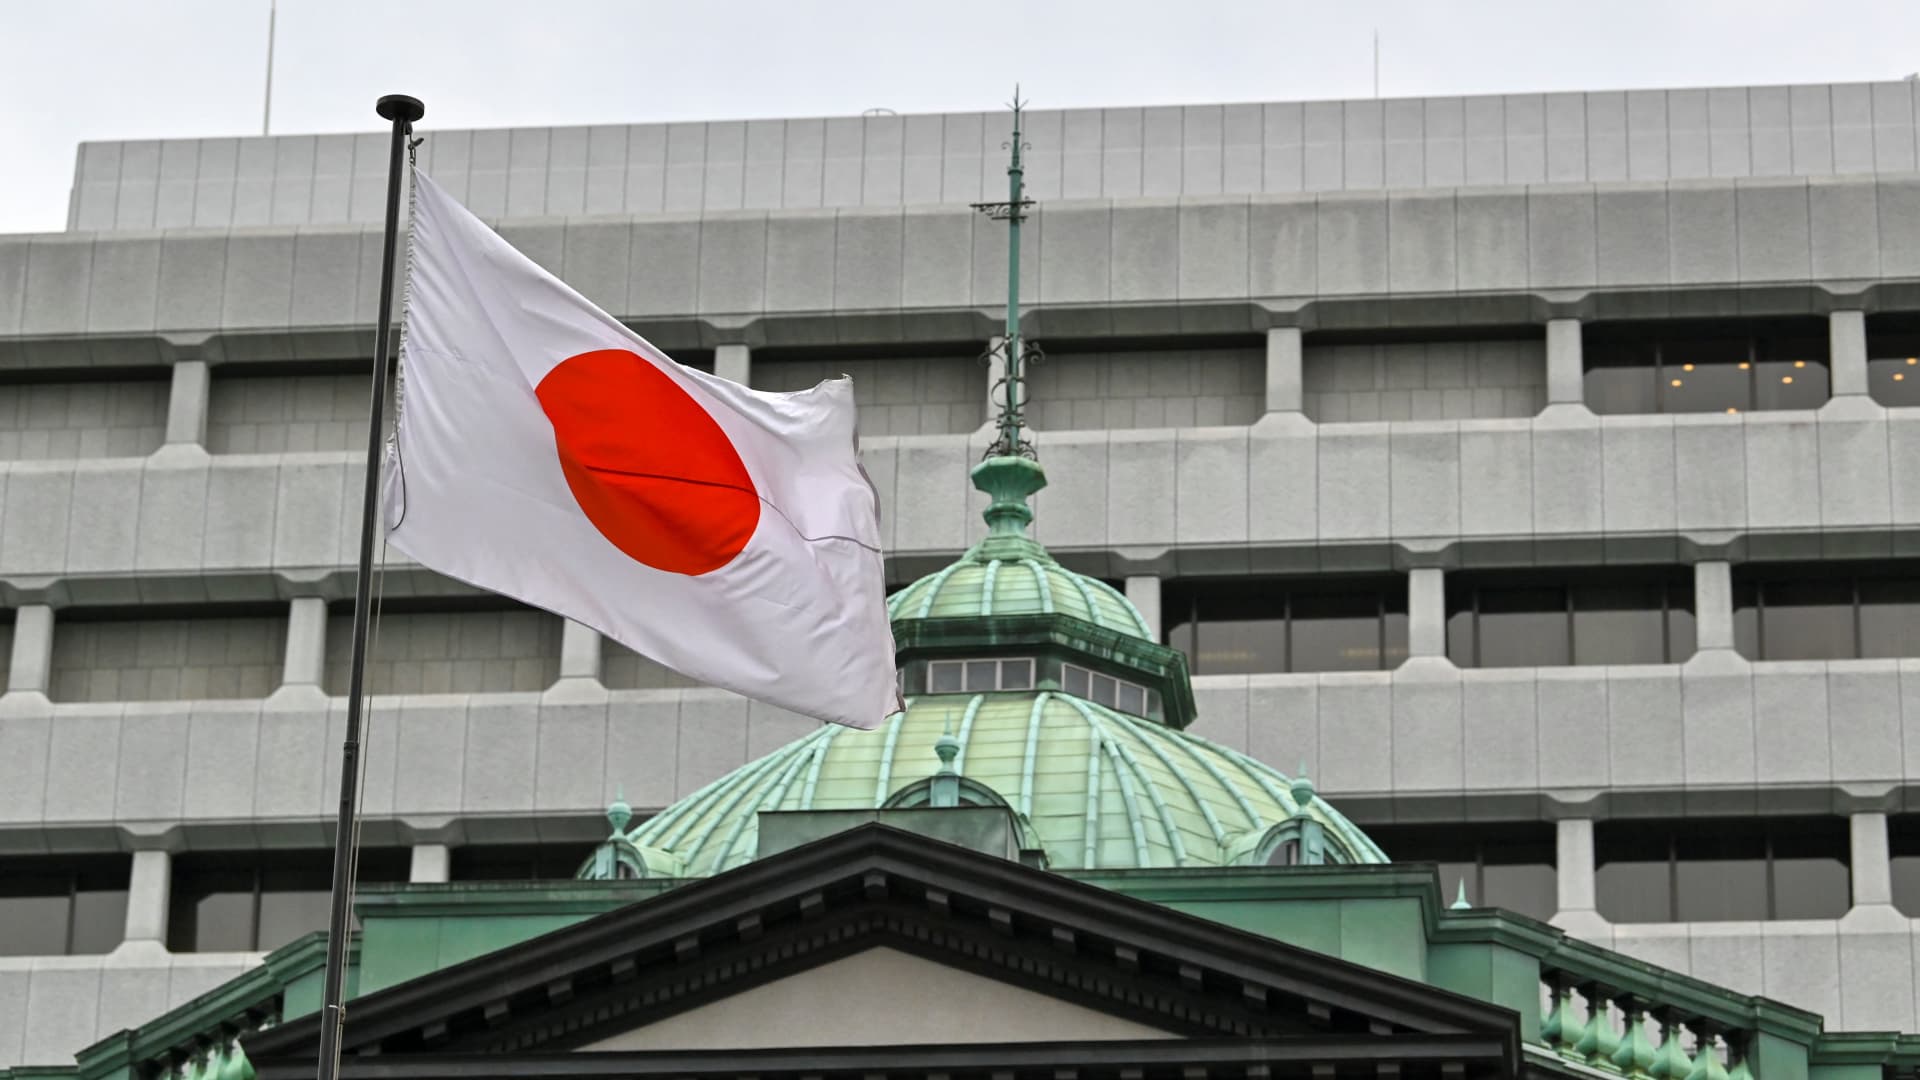 The Japanese flag flutters over the Bank of Japan (BoJ) head office building (bottom) in Tokyo on April 27, 2022.